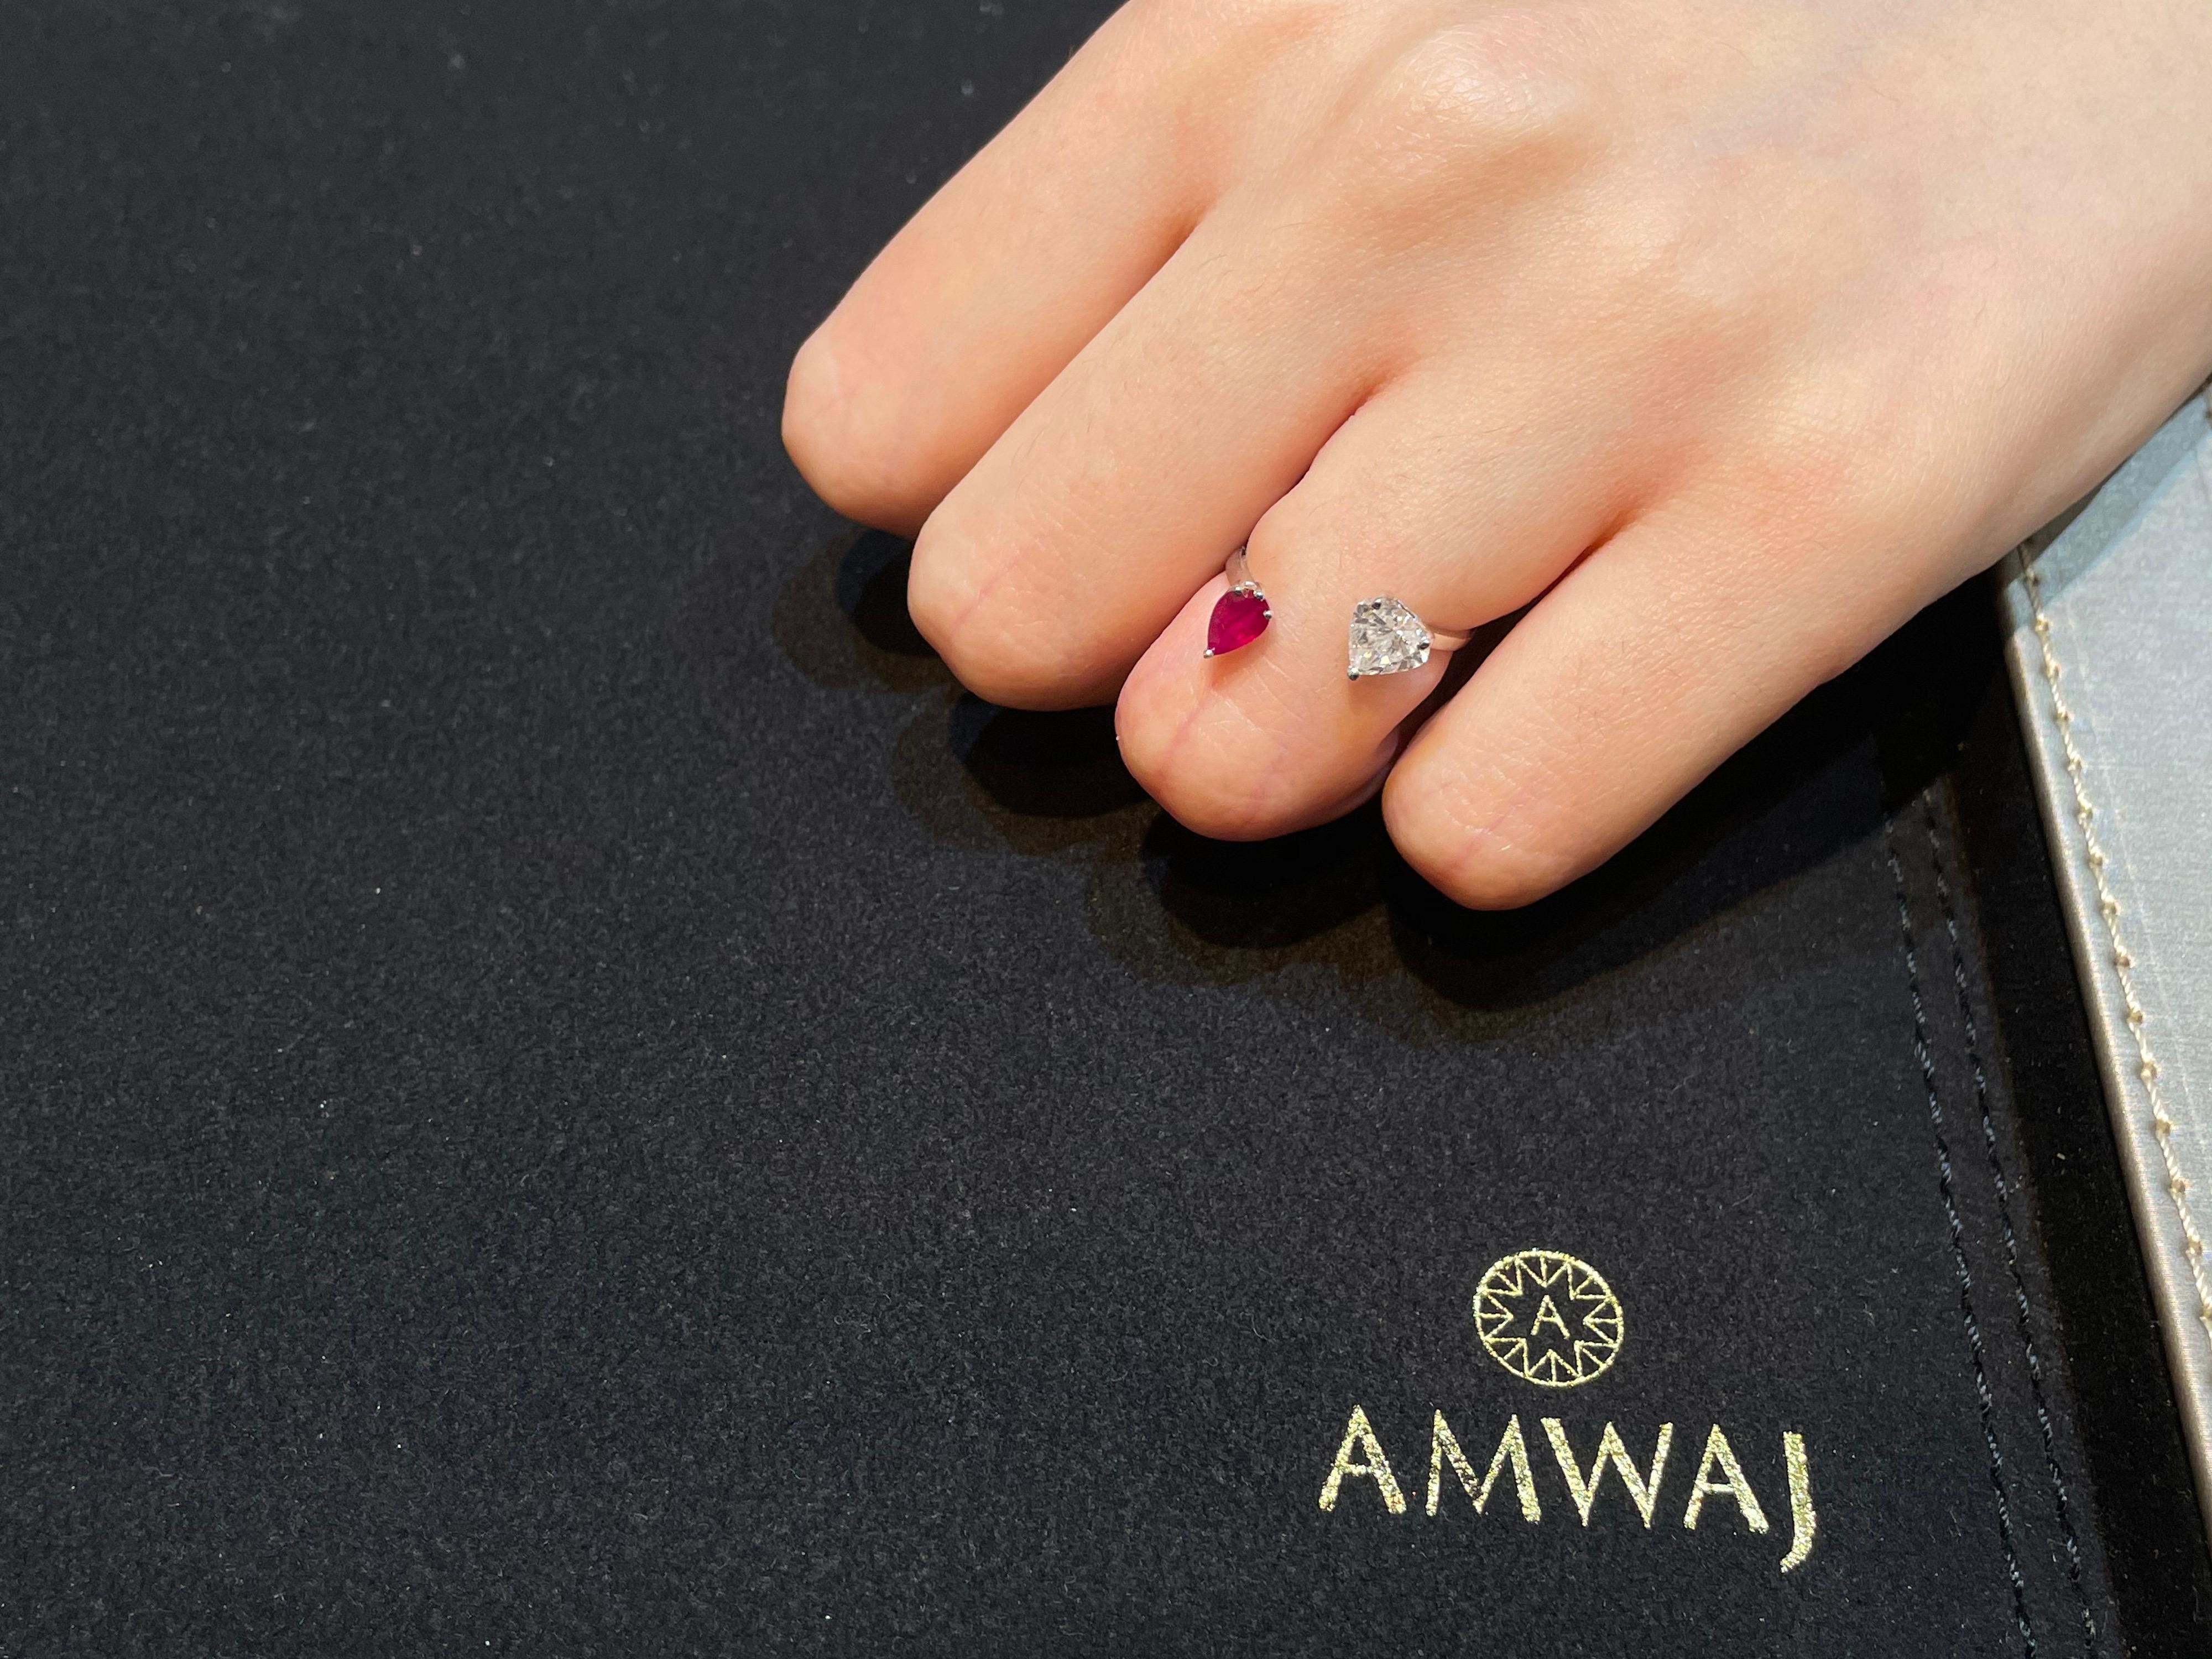 Amwaj Jewellery 18 Karat White Gold Ring with Ruby and Heart Cut Diamond In New Condition For Sale In Abu Dhabi, Abu Dhabi